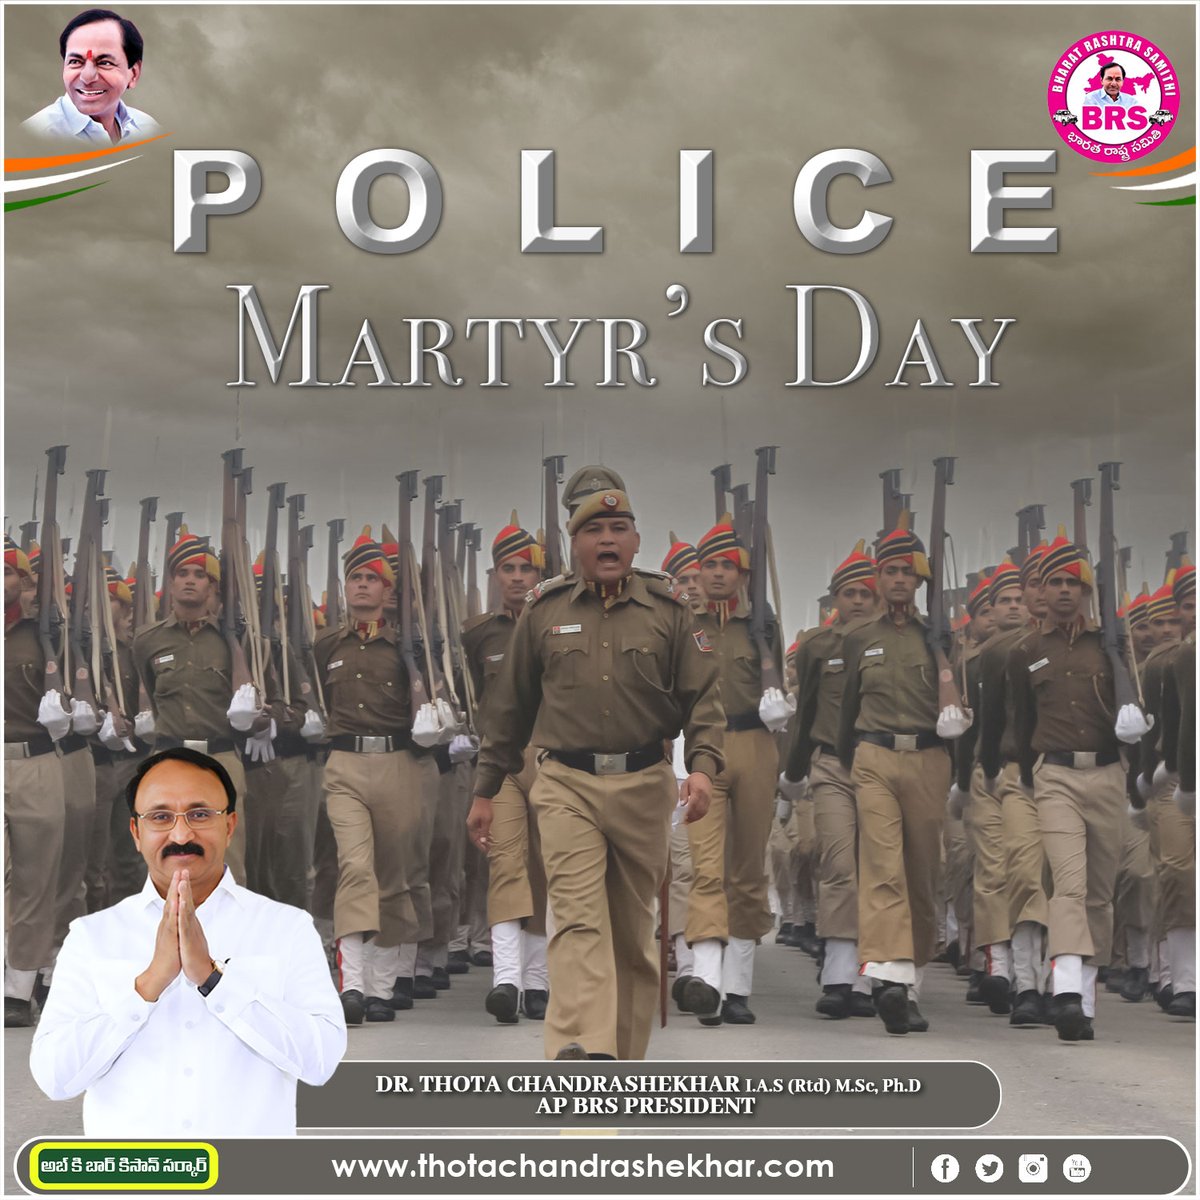 Today, we come together to pay tribute to the brave men and women who sacrificed their lives in the line of duty, on Police Martyrs Day. 🚓💙

#PoliceMartyrsDay #RIPHeroes #SupportOurPolice #WeStandWithYou #thotachandrashekhar